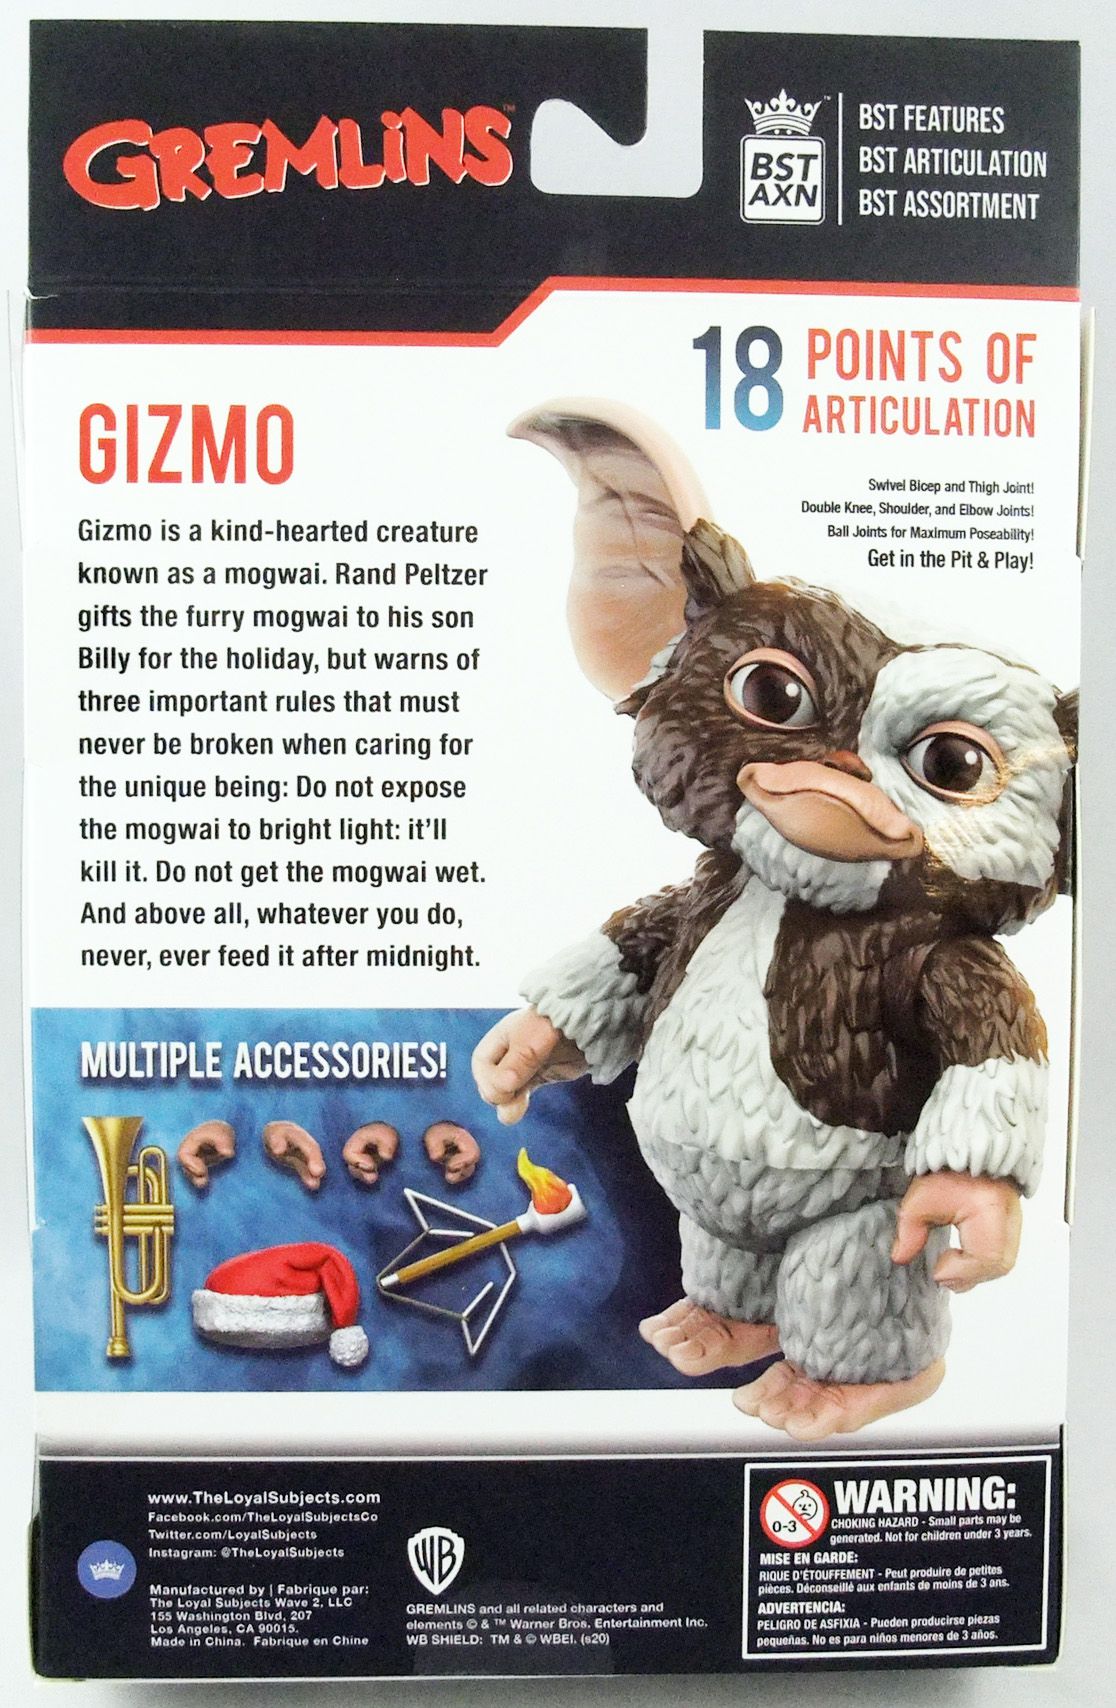 BST AXN Gremlins Gizmo 5 Inch Action Figure